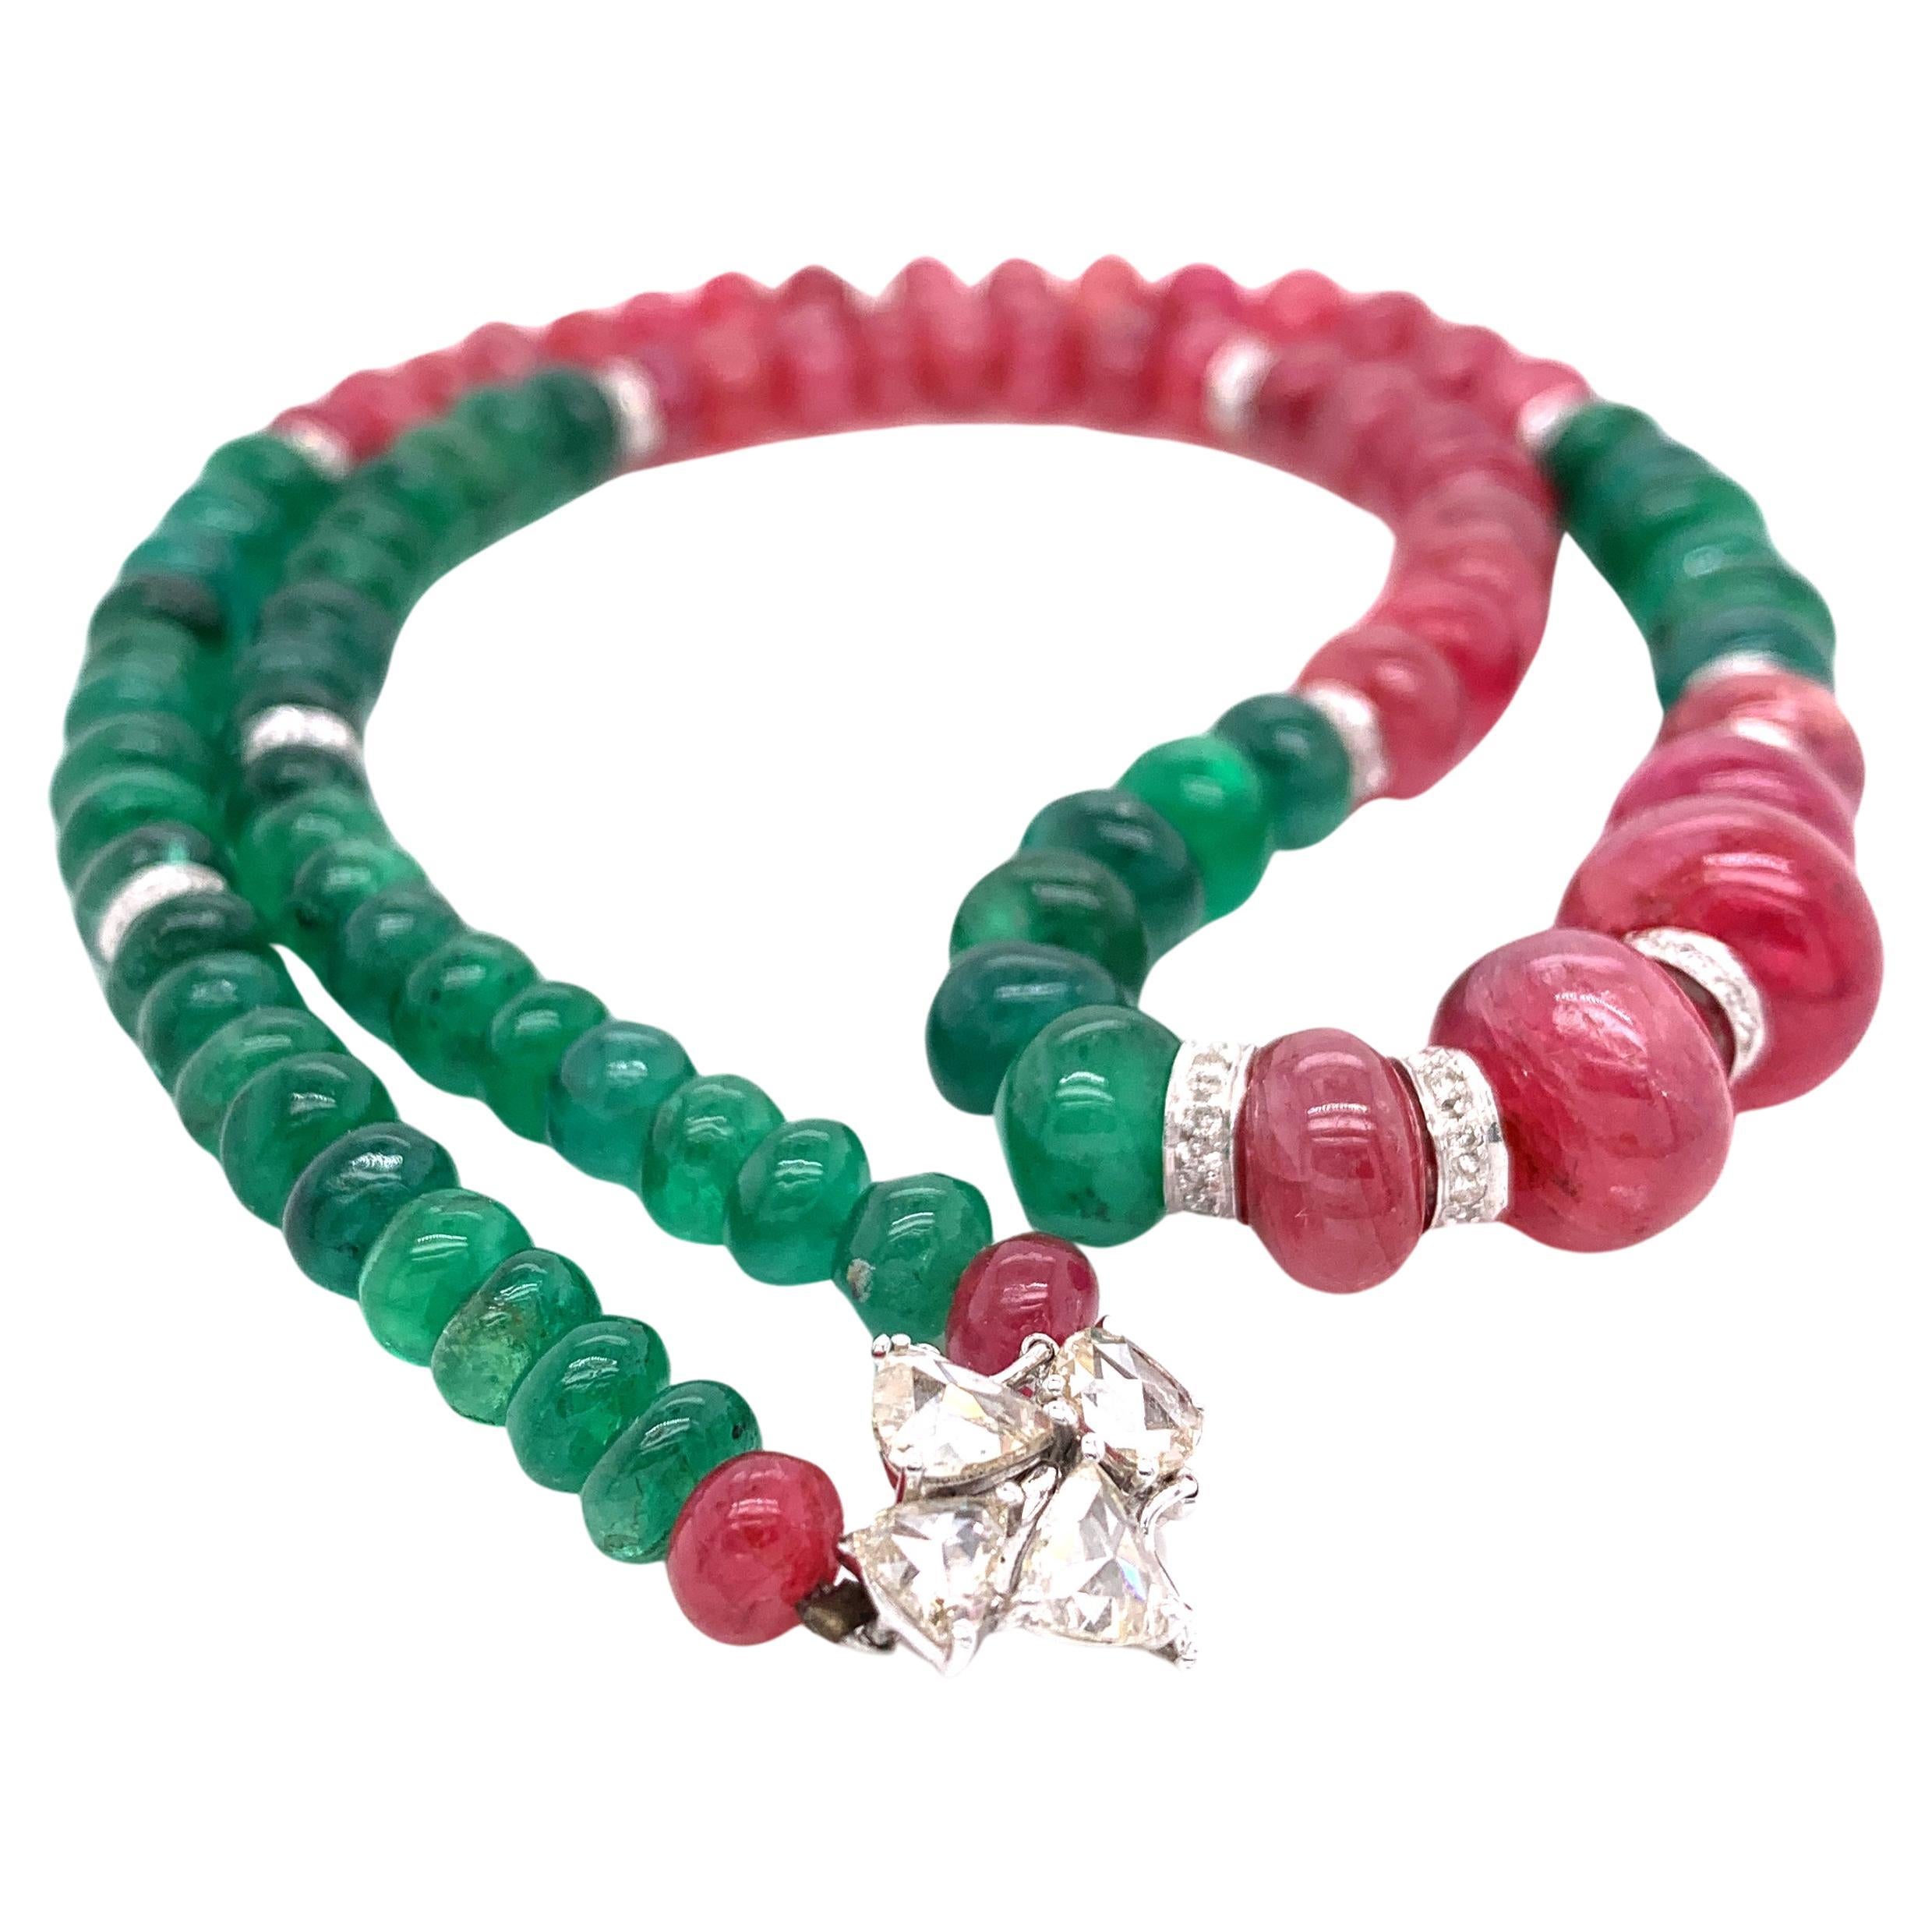 Burmese Ruby and Emerald Beads White Diamond Gold Necklace